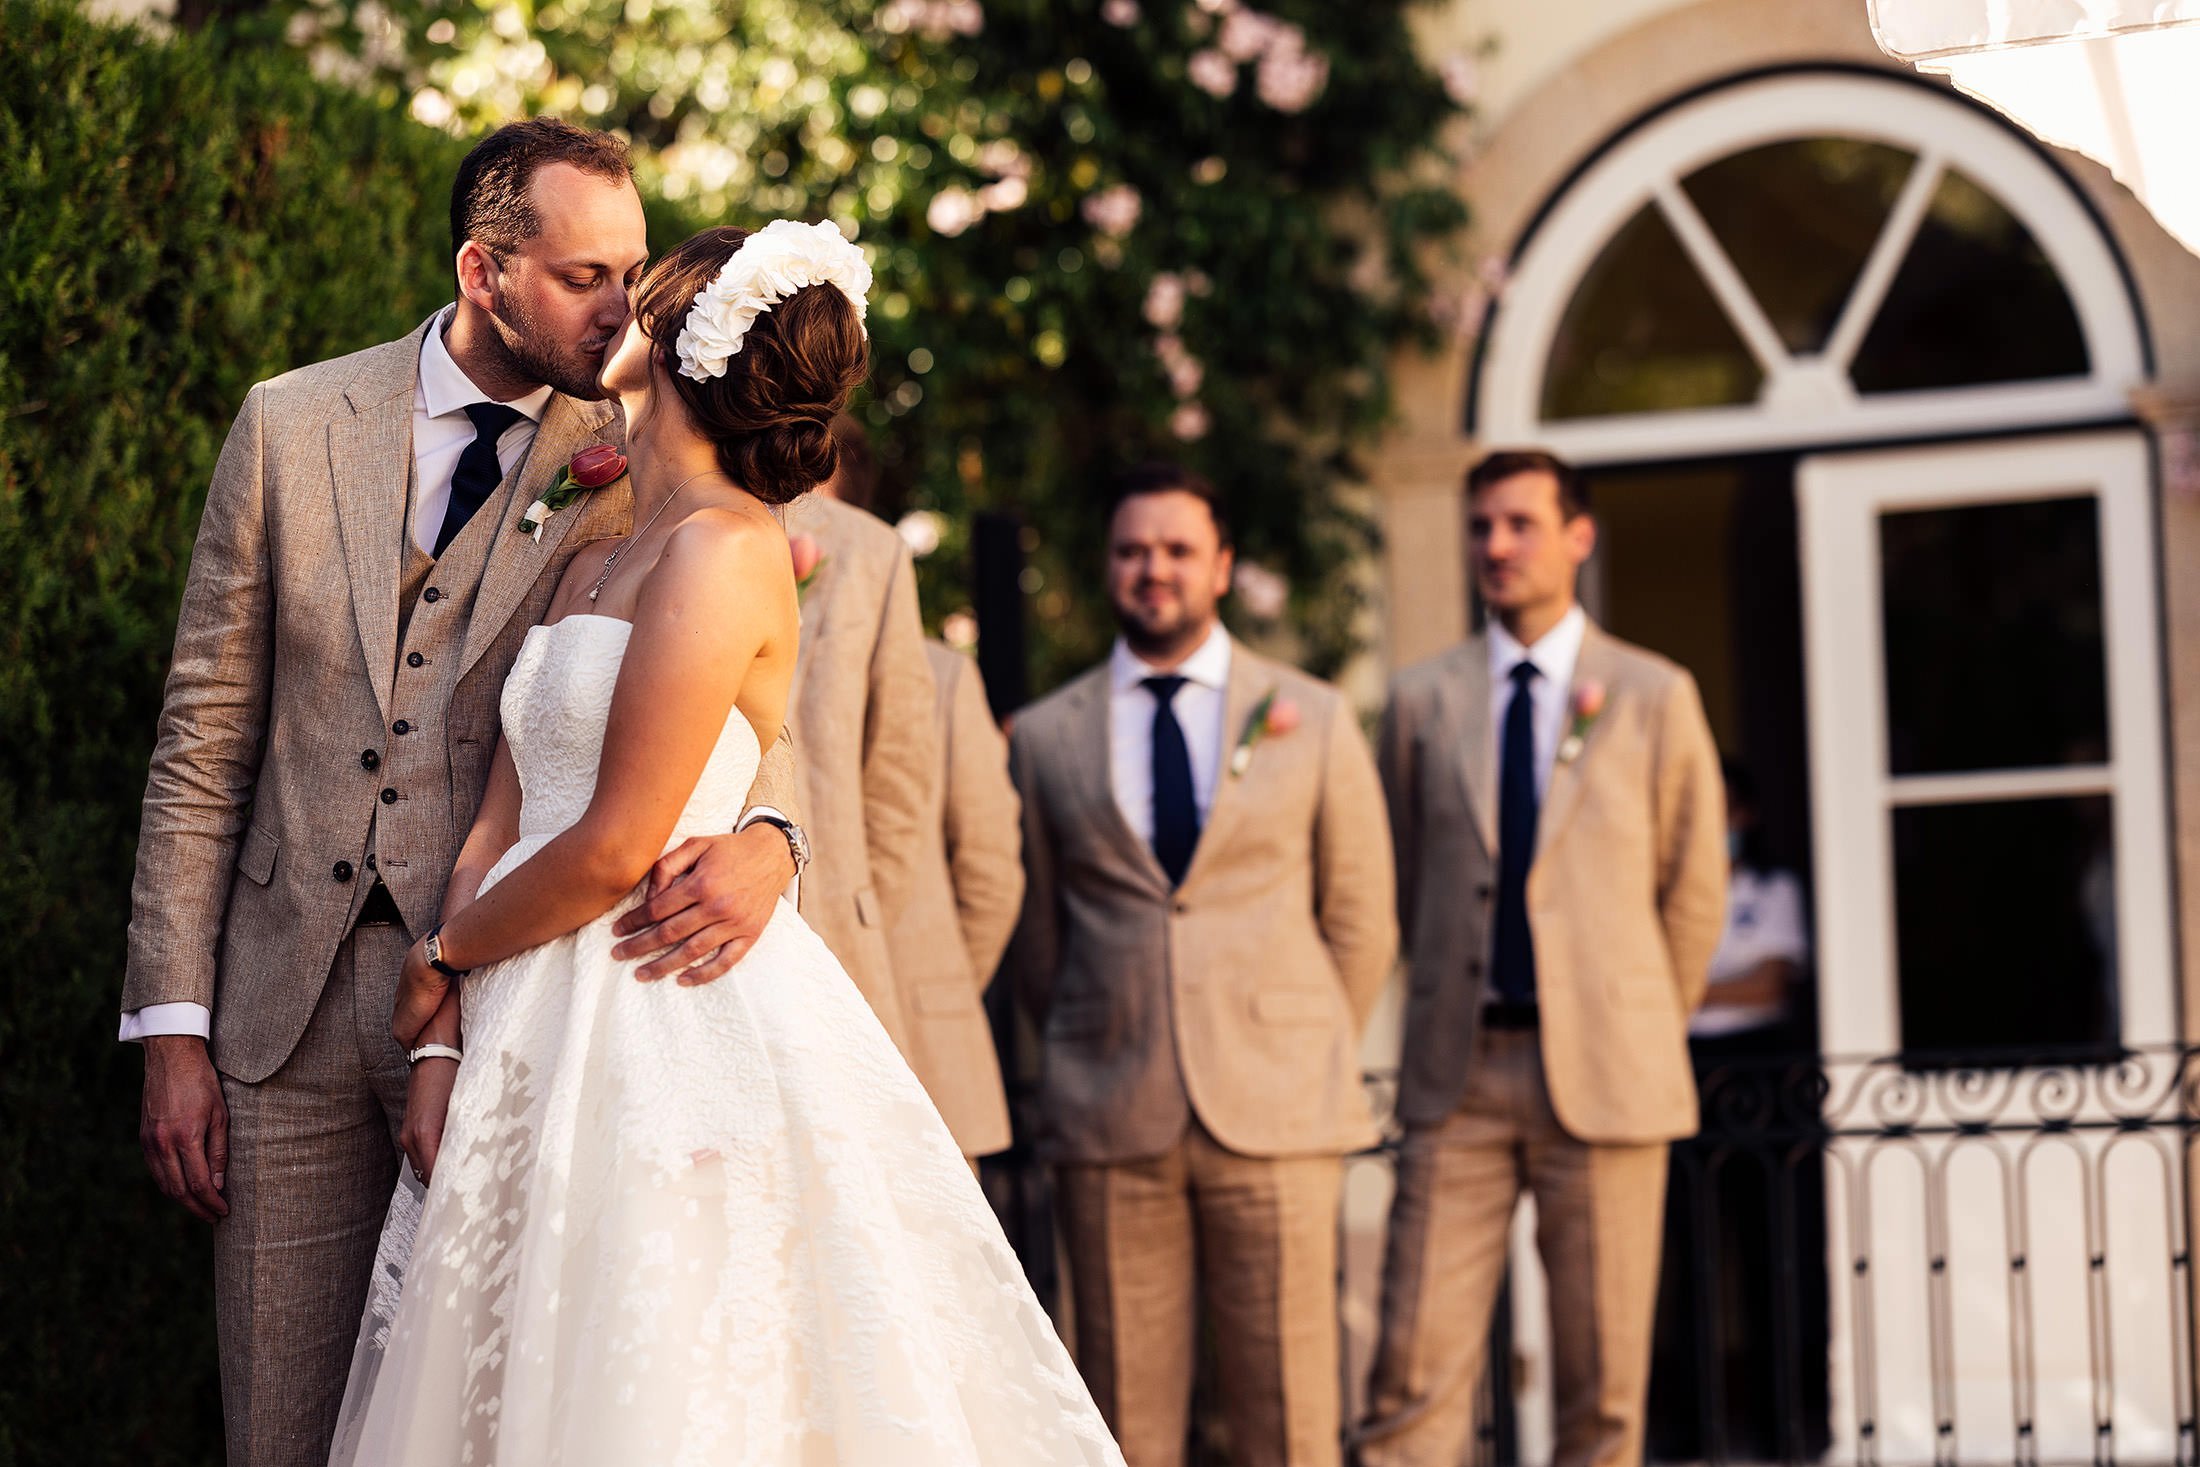 couple kiss at outdoor wedding ceremony in Portugal